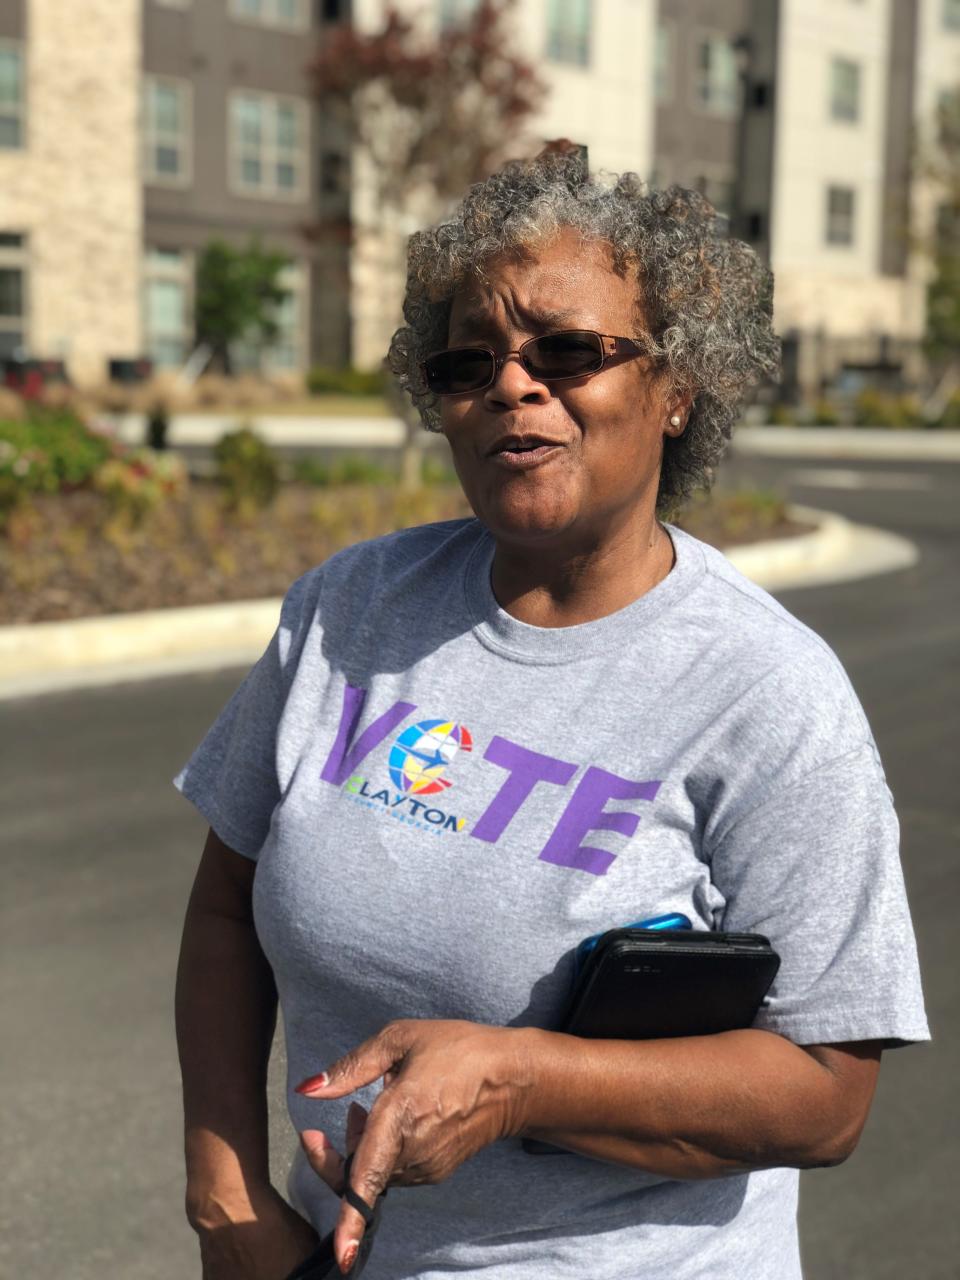 Delores Williams of Clayton County, Ga., moved to the county from Brooklyn, N.Y., 35 years ago. “Clayton is a very different place now than when I moved here," she says.